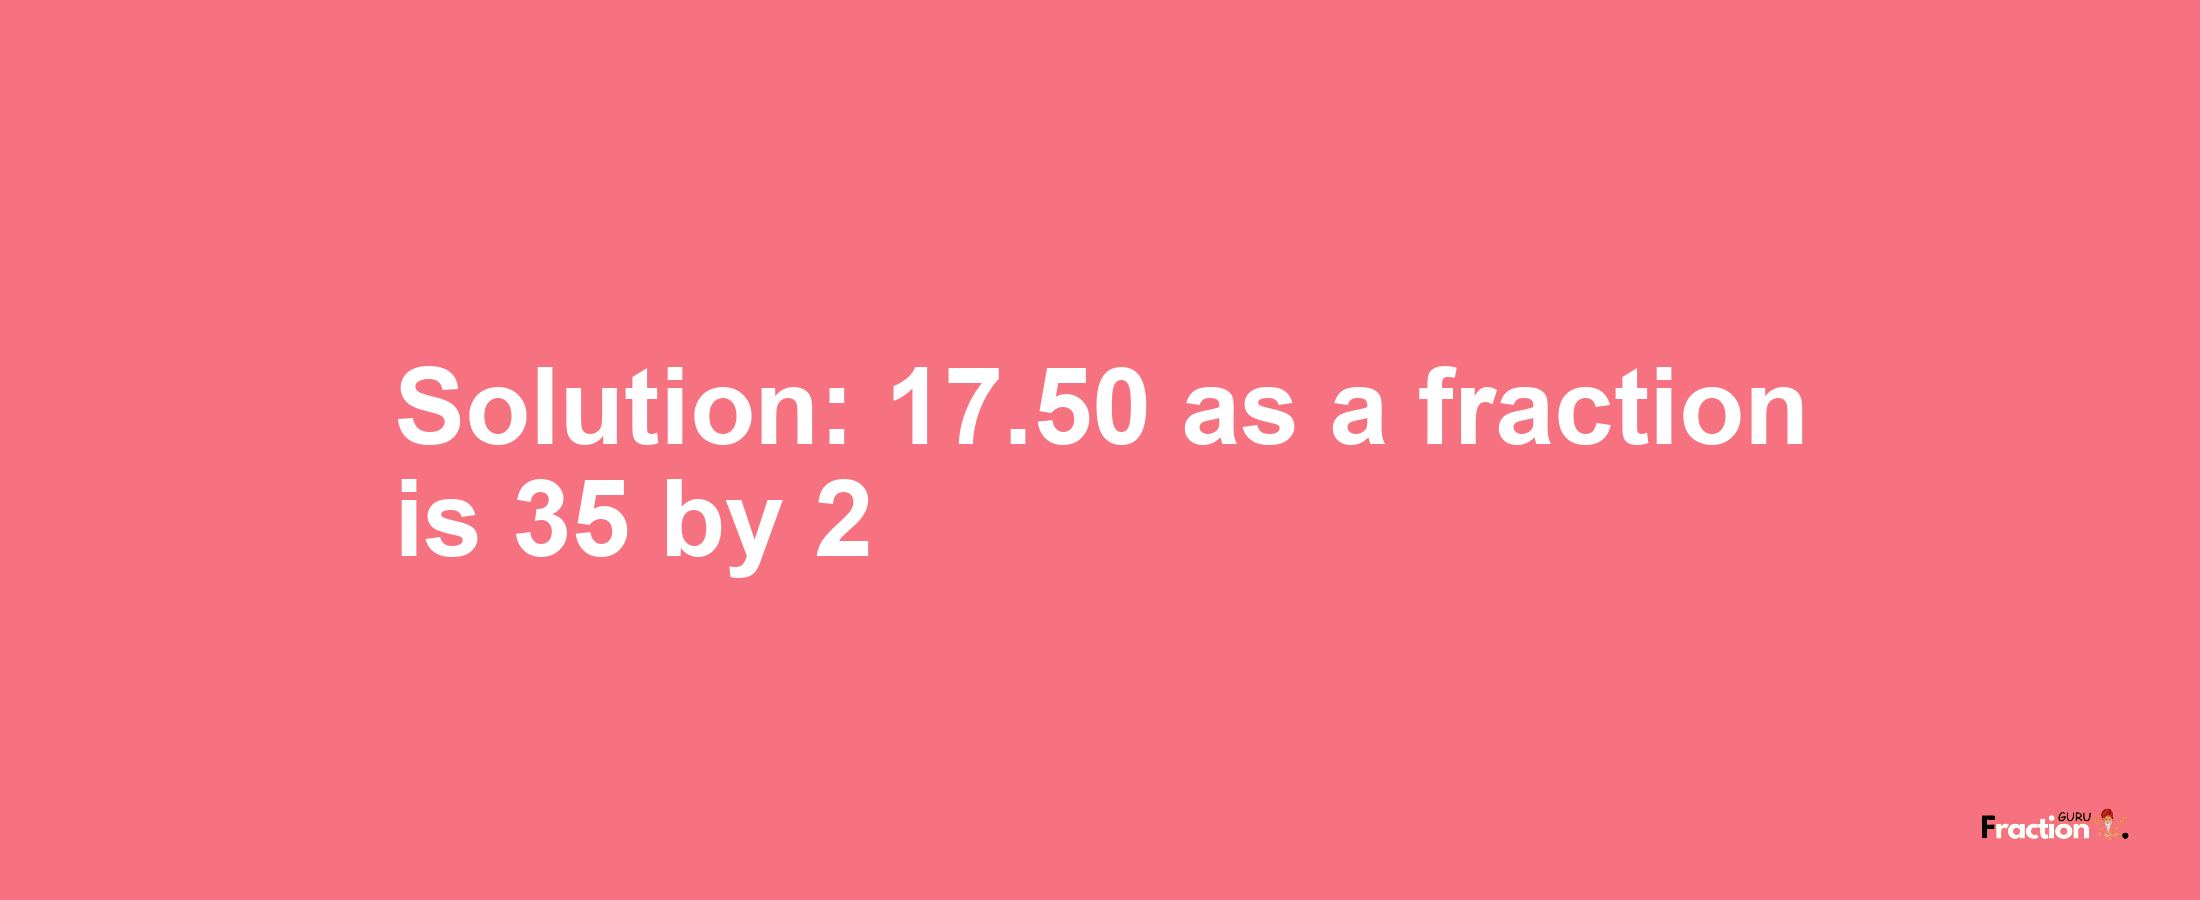 Solution:17.50 as a fraction is 35/2